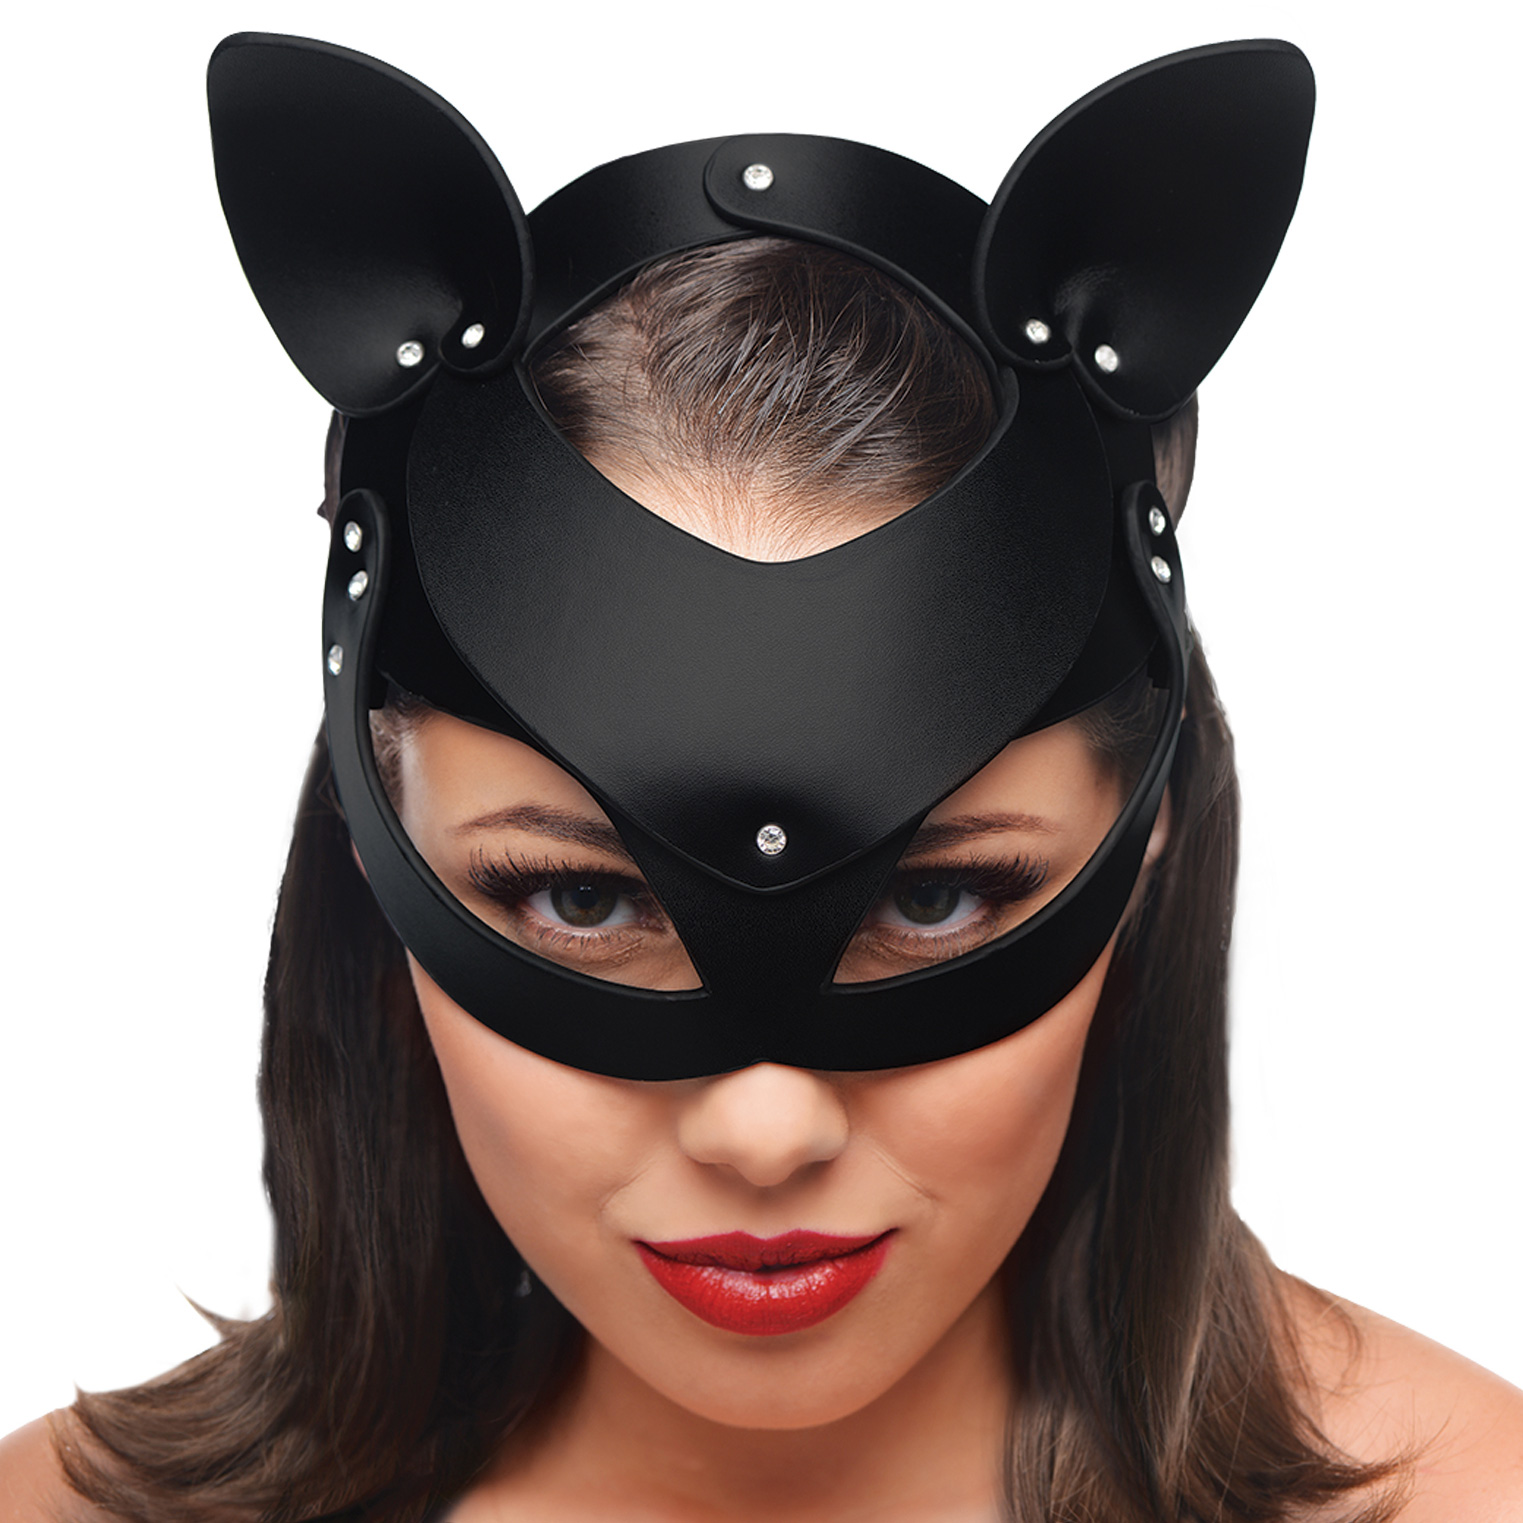 Tailz Black Silicone Anal Plug With Black Faux Fur Cat Tail & Matching Cat Mask - Mask On Model